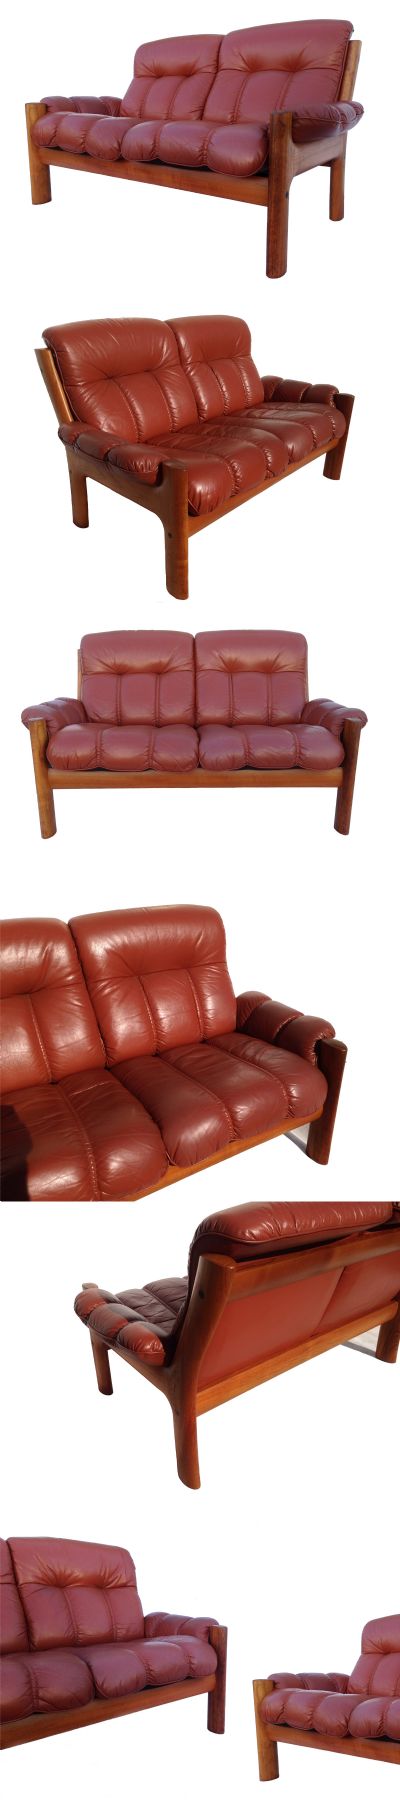 A  teak and leather 2 seater sofa by Glostrup mobelfabrik of Denmark, c1970s. One of a pair available.